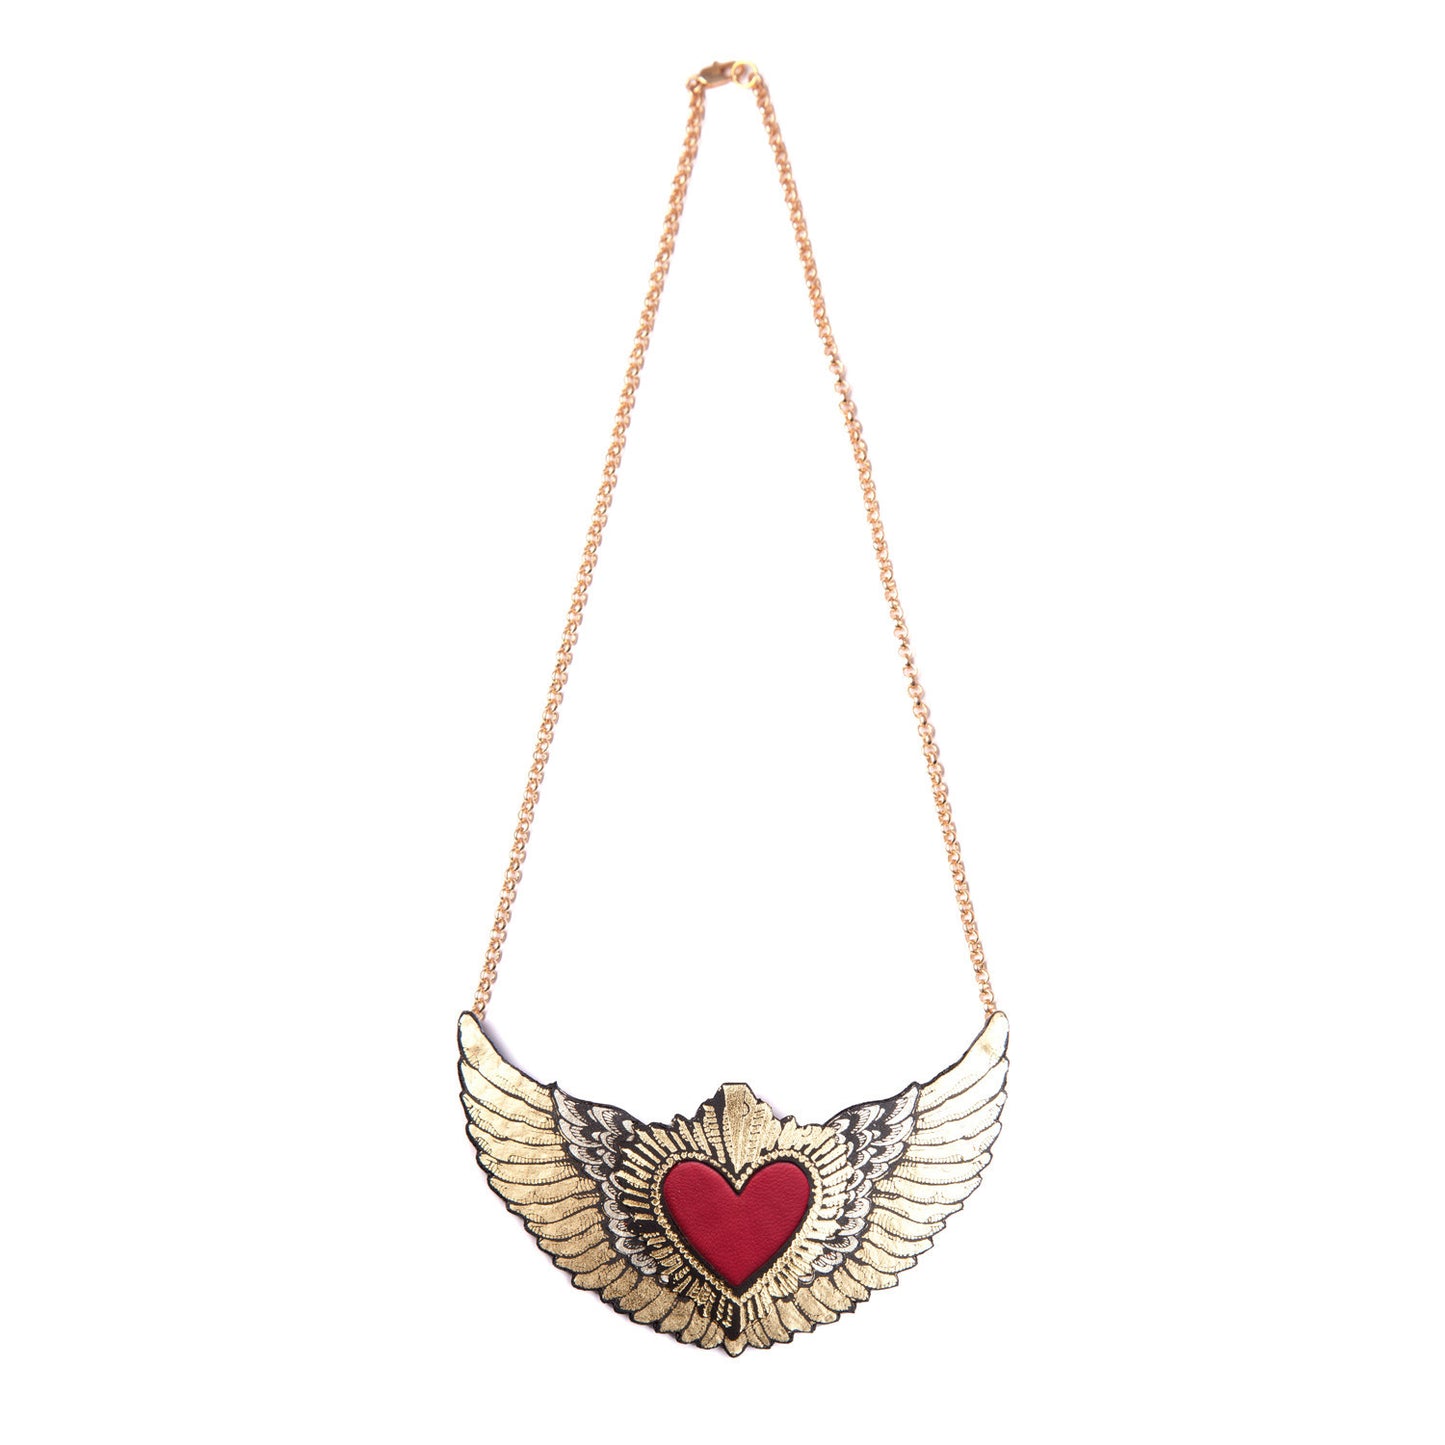 WINGED HEART . necklace